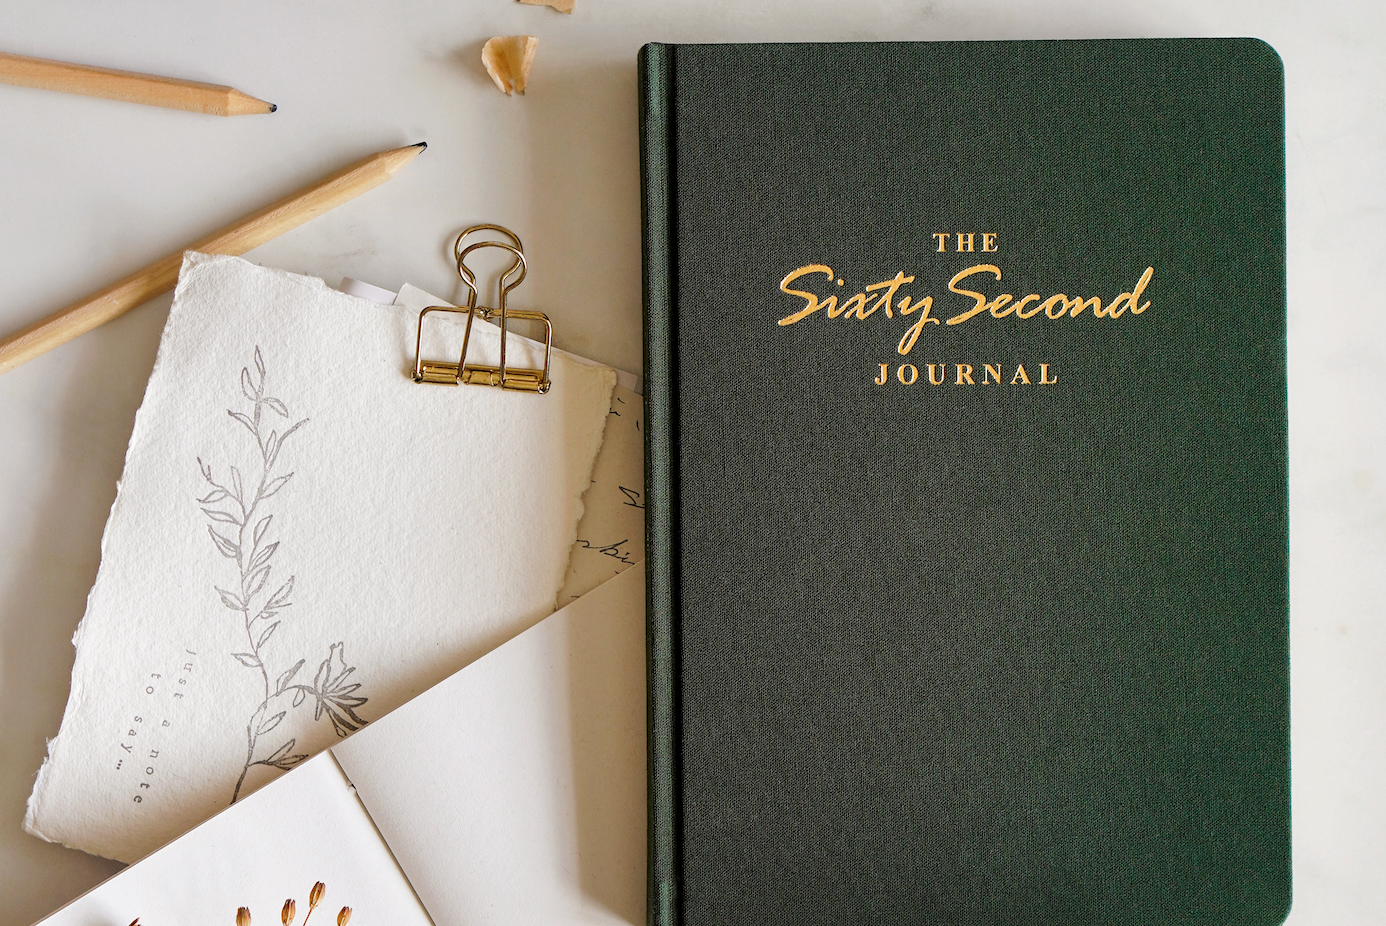 The outside of The Sixty Second Journal